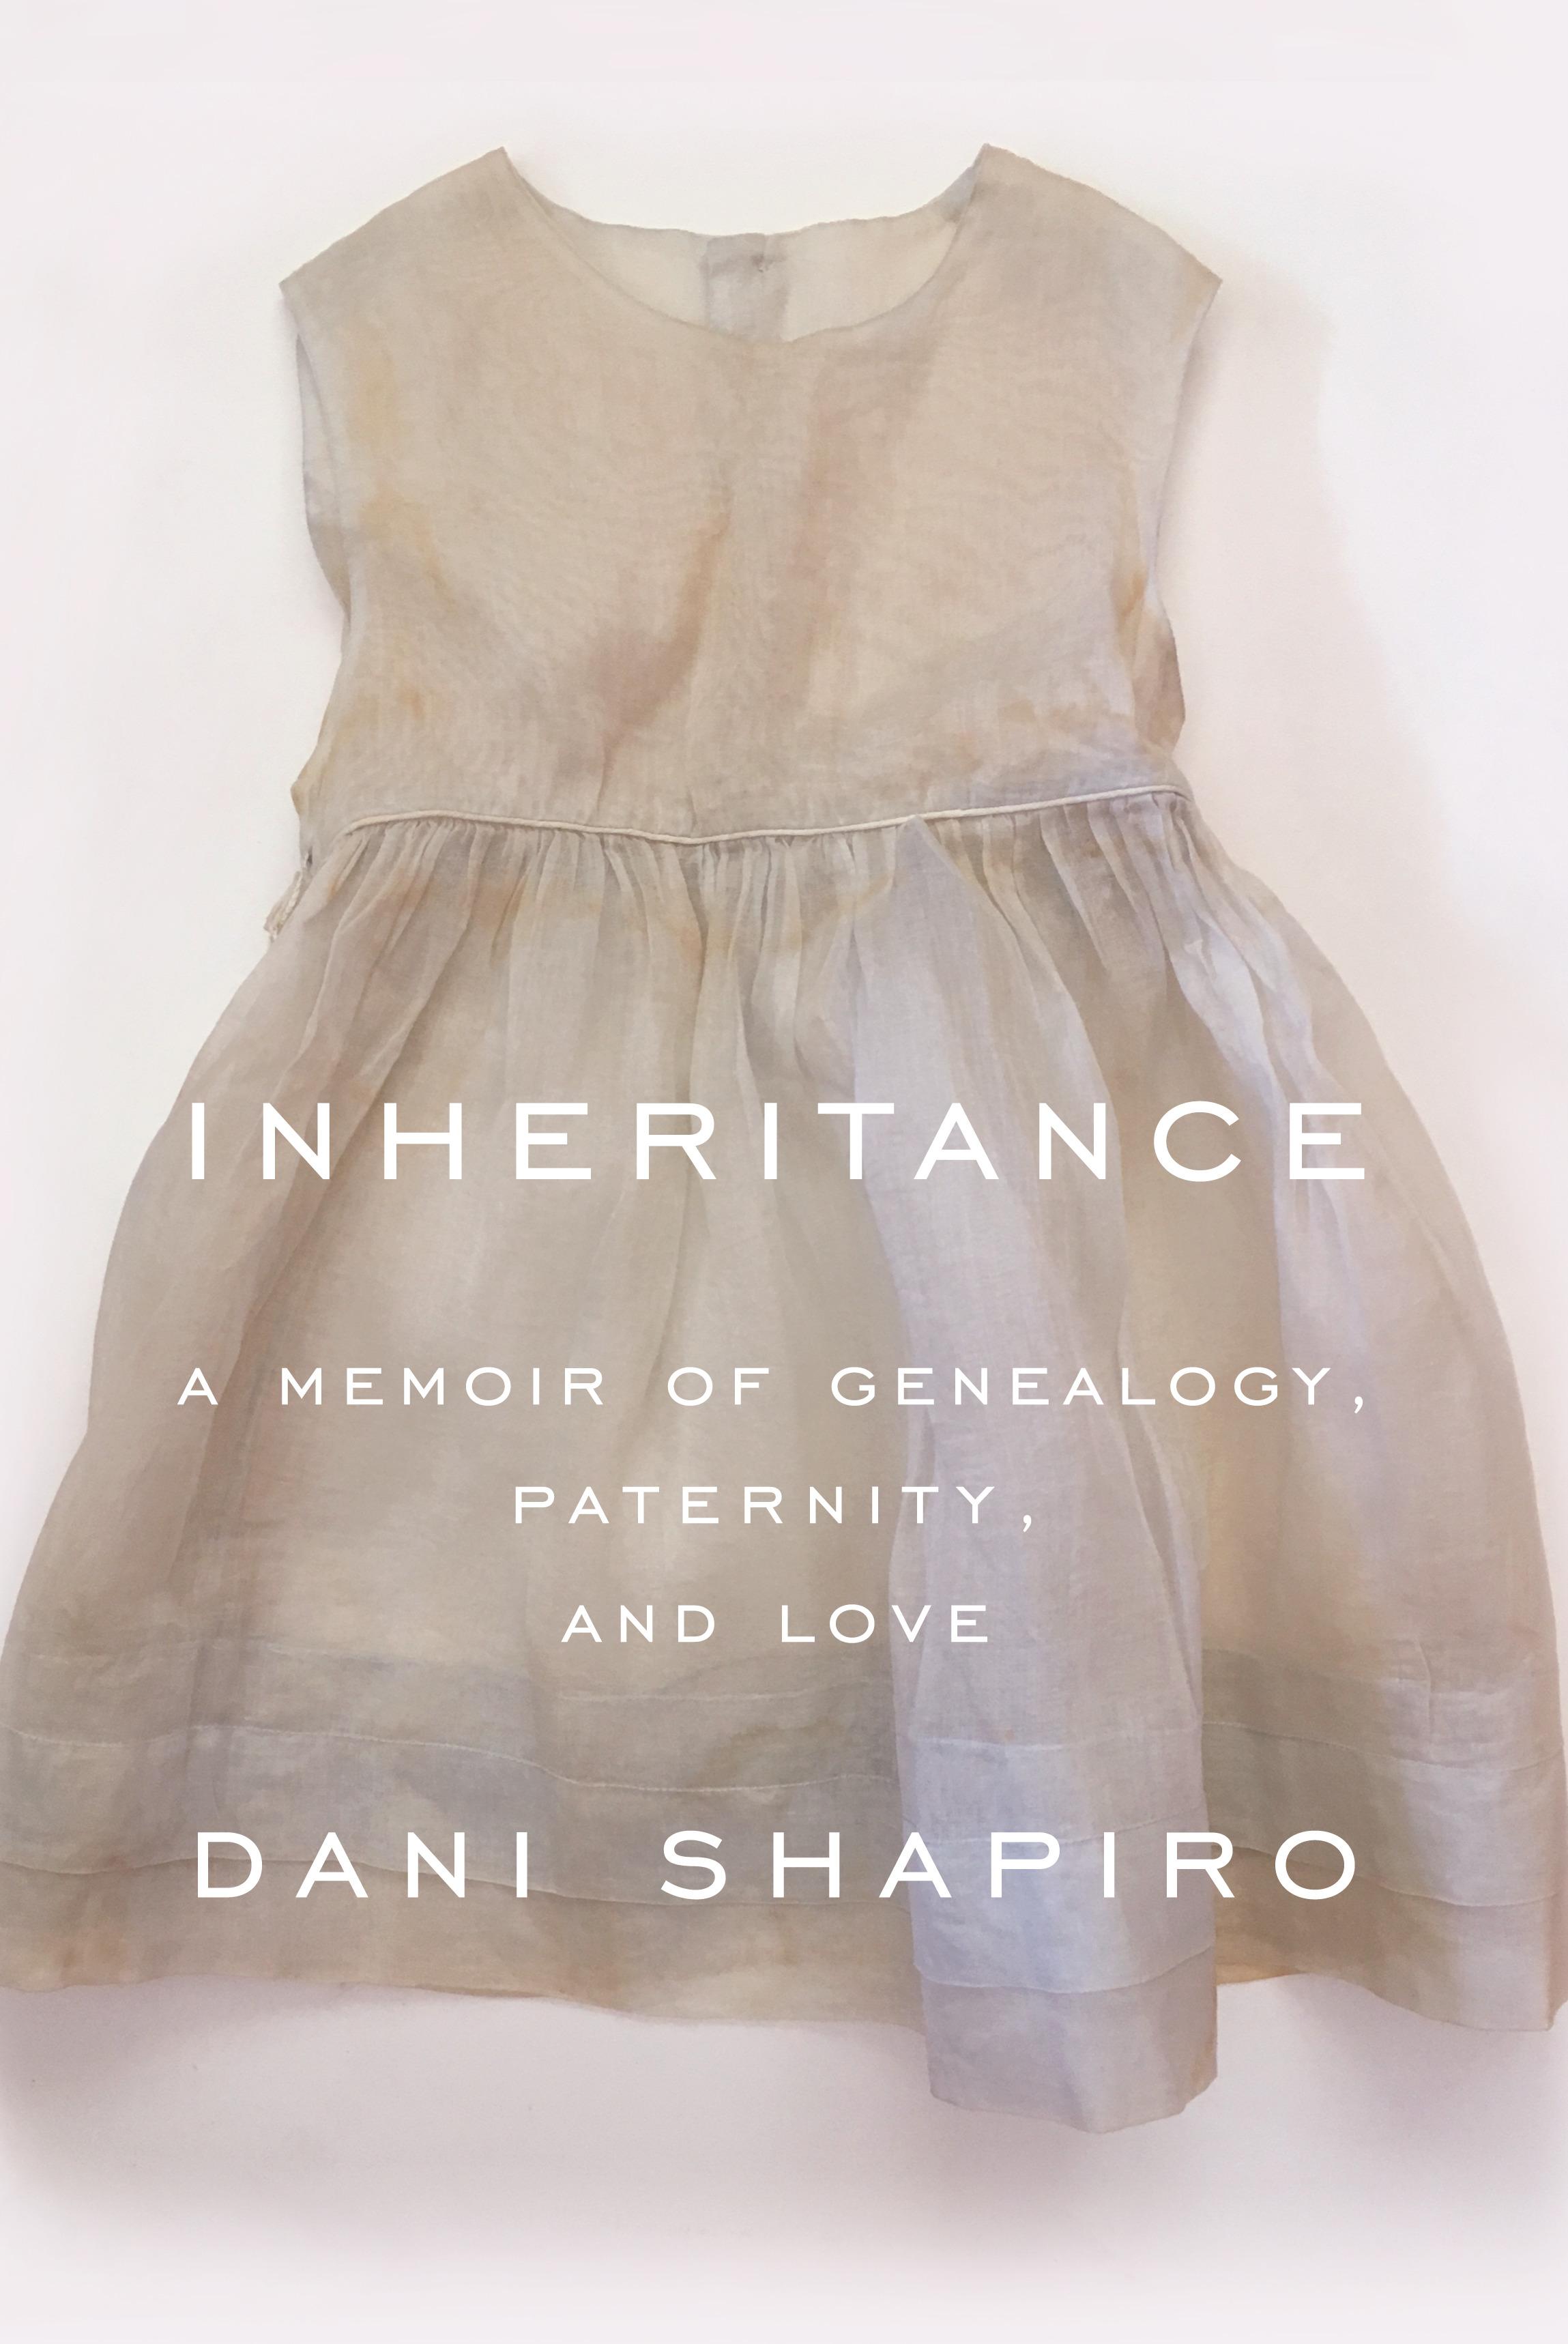 Book cover for "Inheritance" by Dani Shapiro featuring a child's white dress